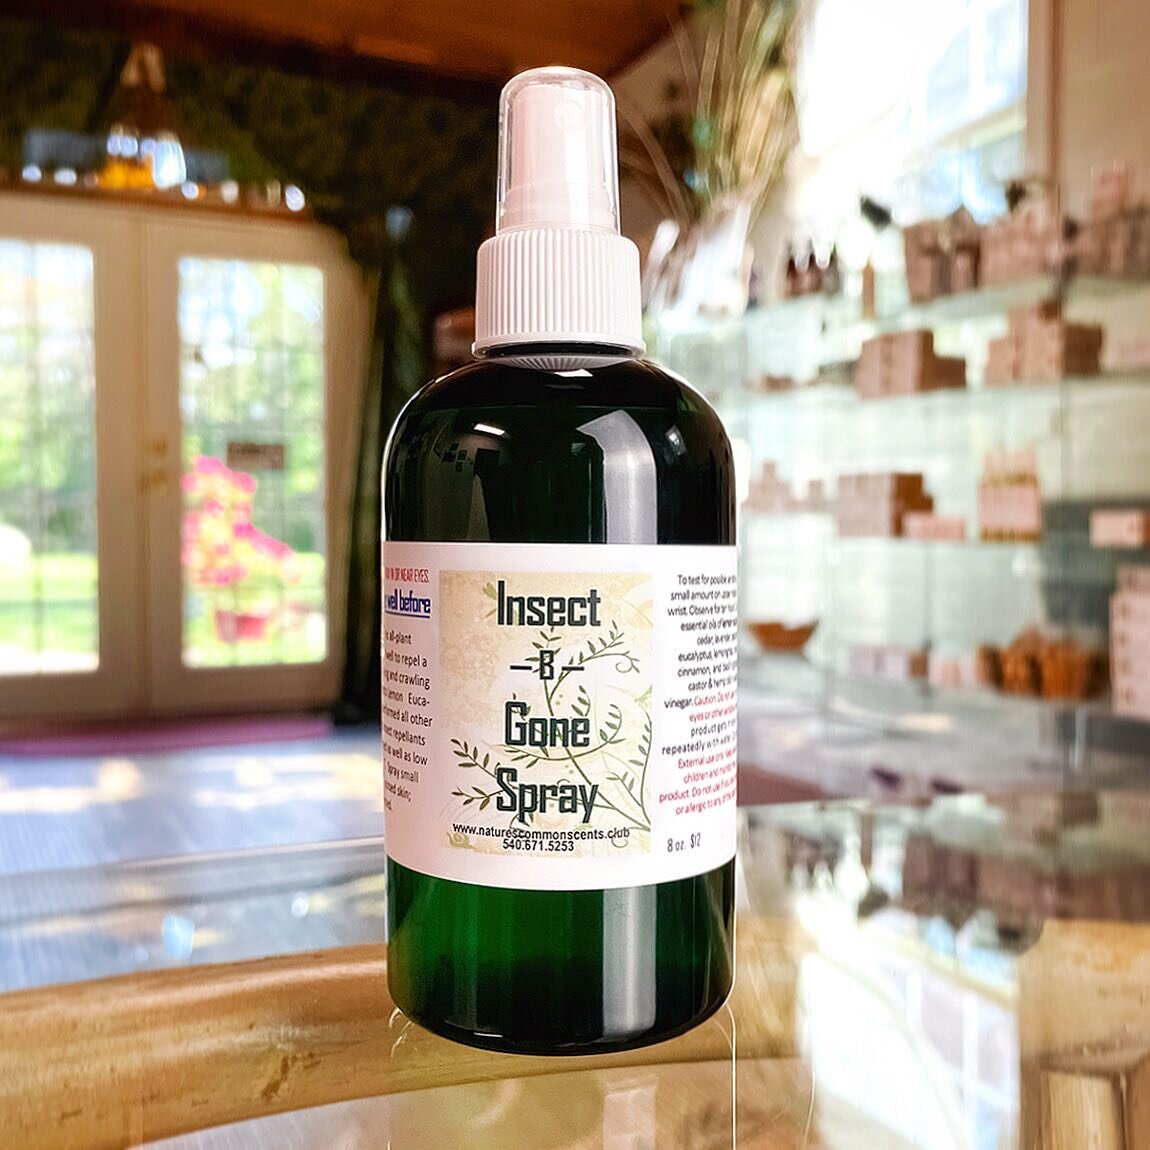 Insect-B-Gone Spray is now available in the online shop for the first time! You can find it and all our other plant-based 🌱 insect repelling products here:
www.naturescommonscents.club/shop/insect-problems